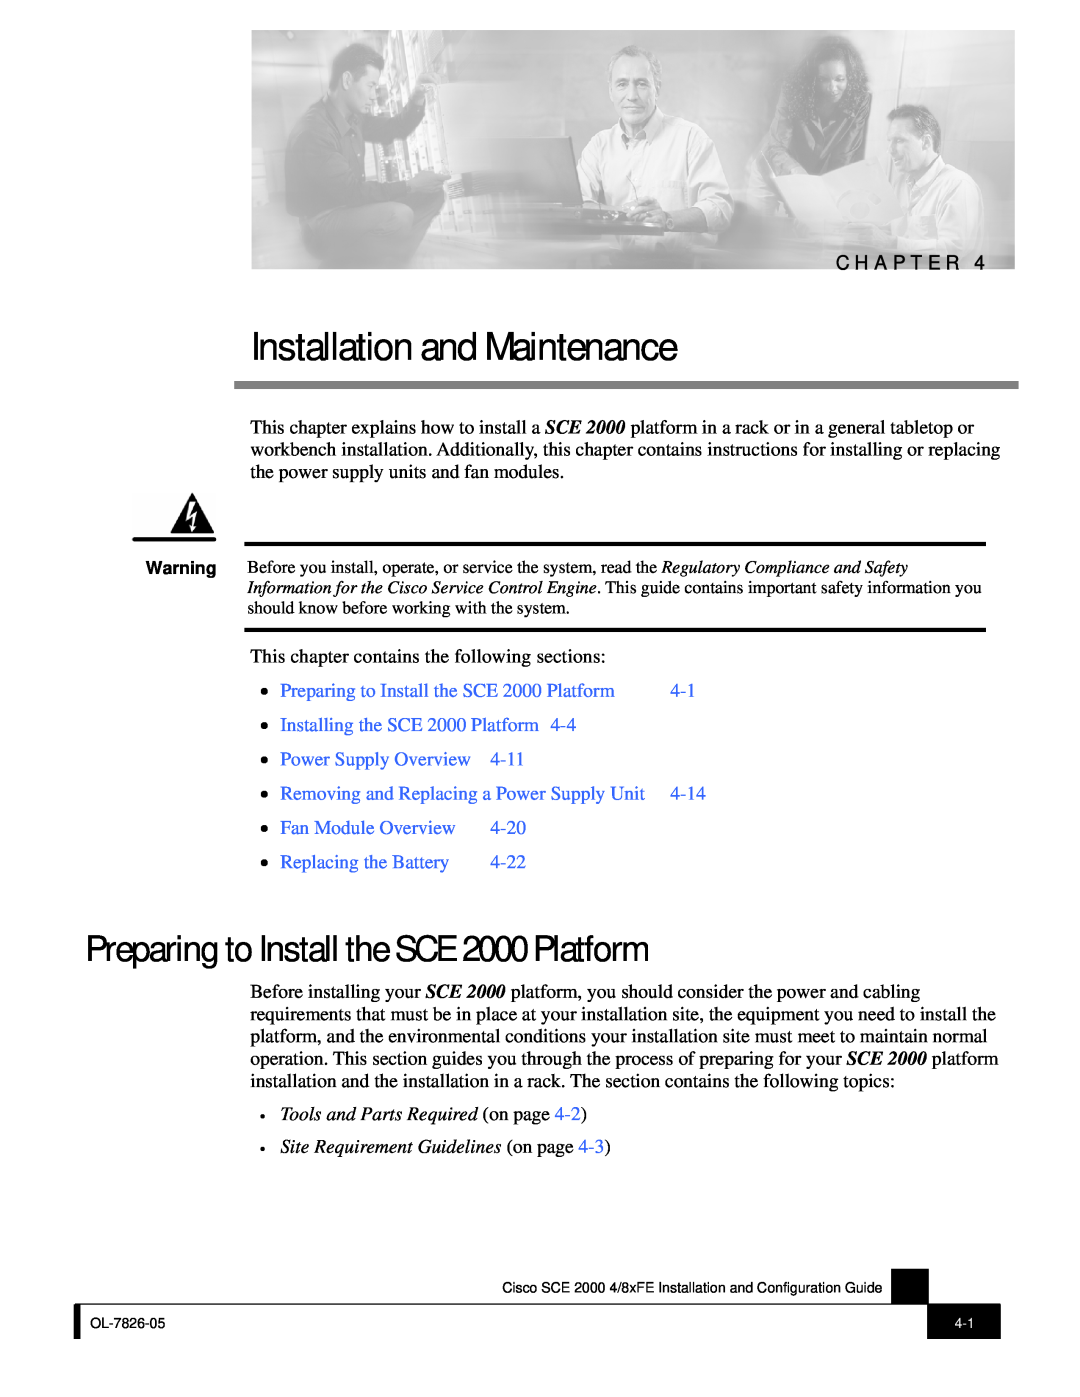 Cisco Systems SCE 2000 4/8xFE Installation and Maintenance, Preparing to Install the SCE 2000 Platform, 4-11, 4-14, 4-20 